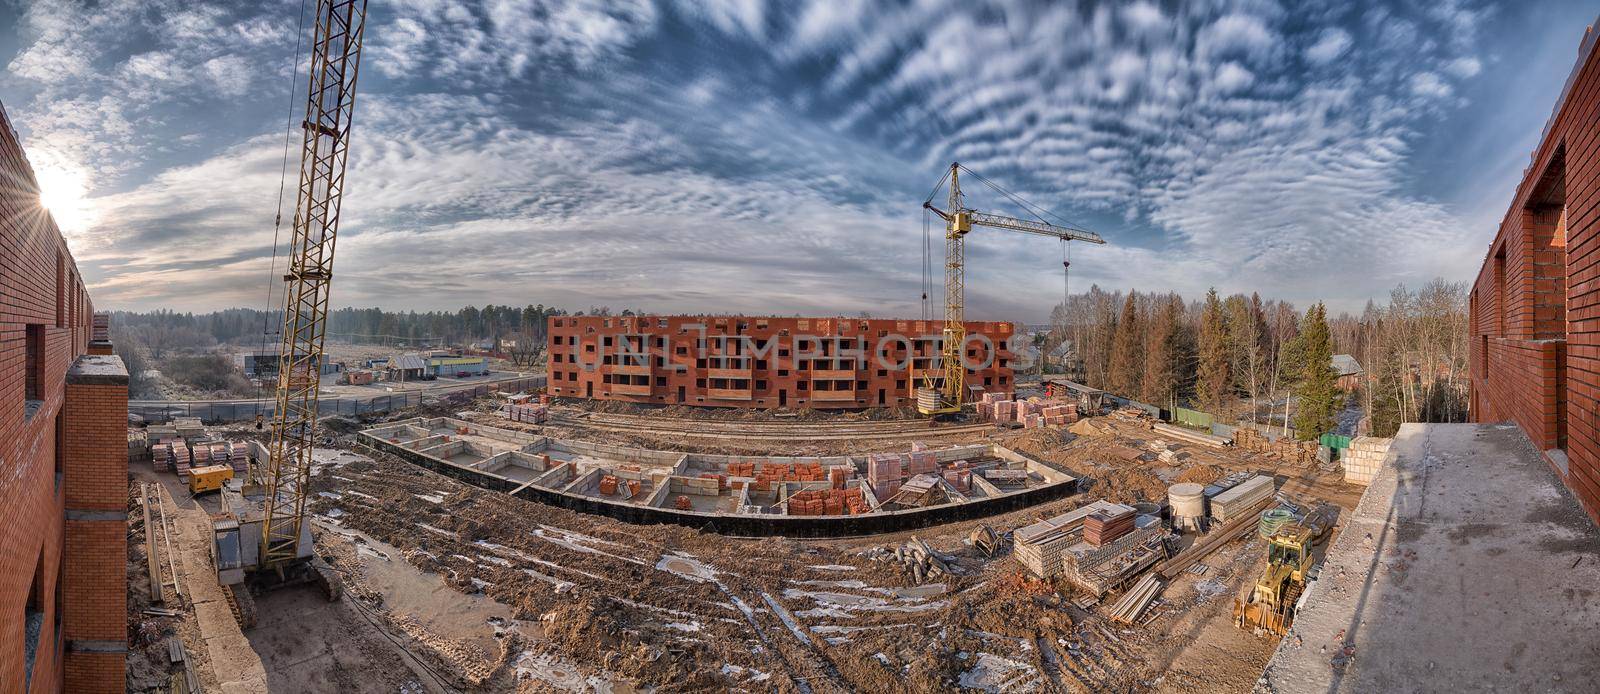 Big construction site with cranes in winter panorama